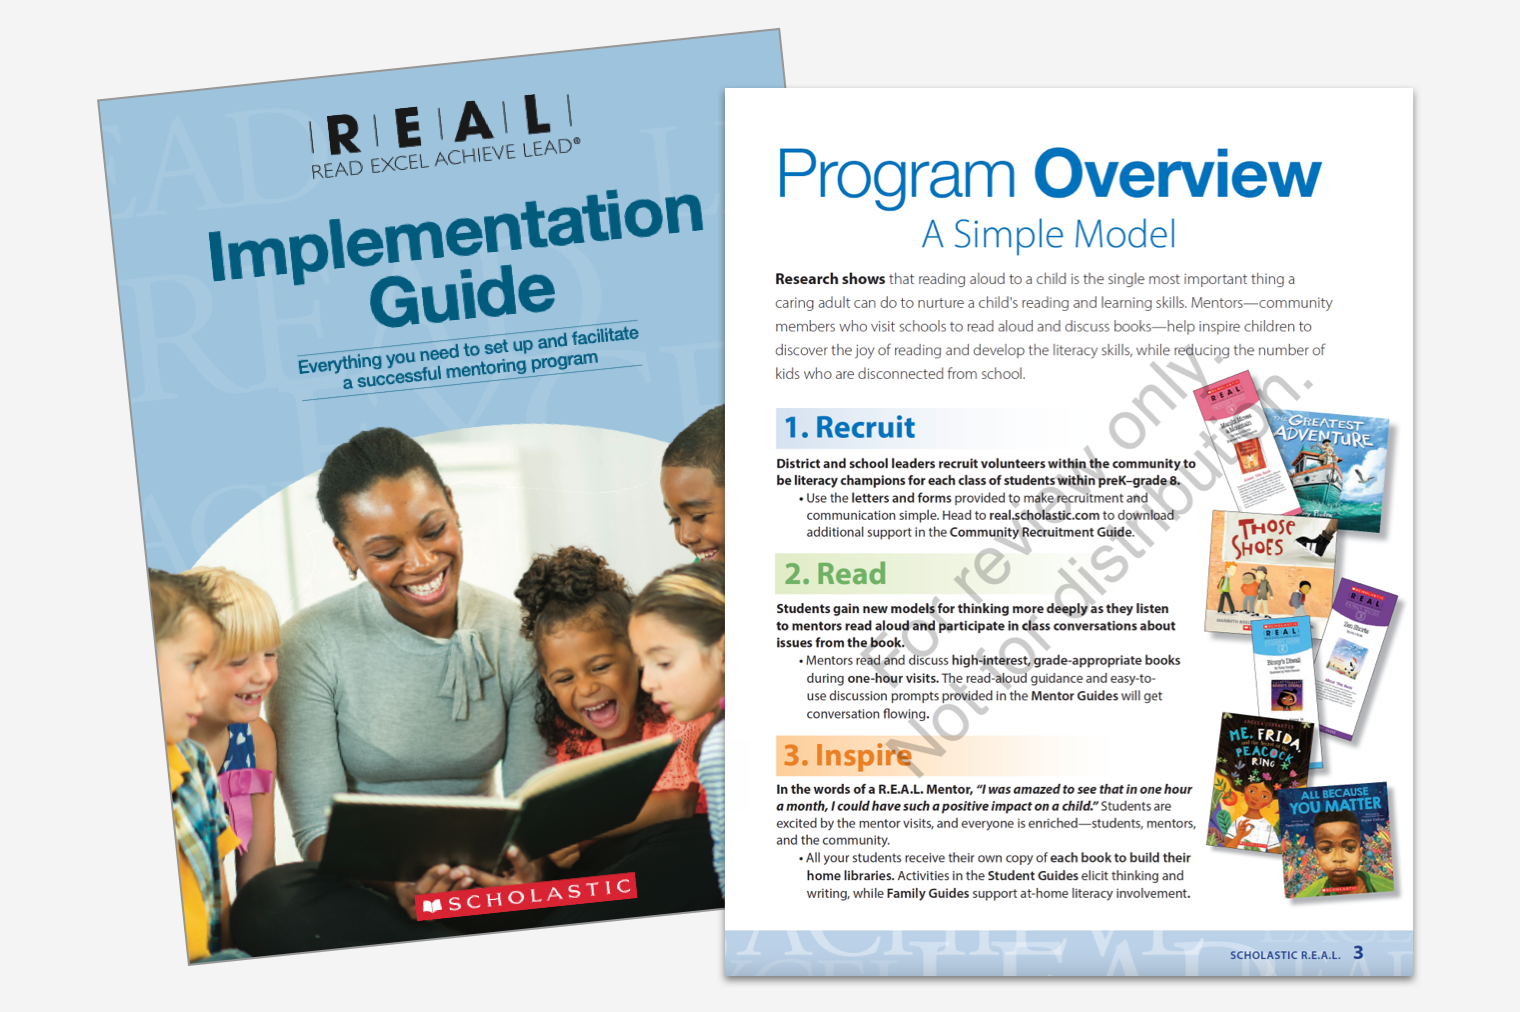 Scholastic REAL Implementation Guide